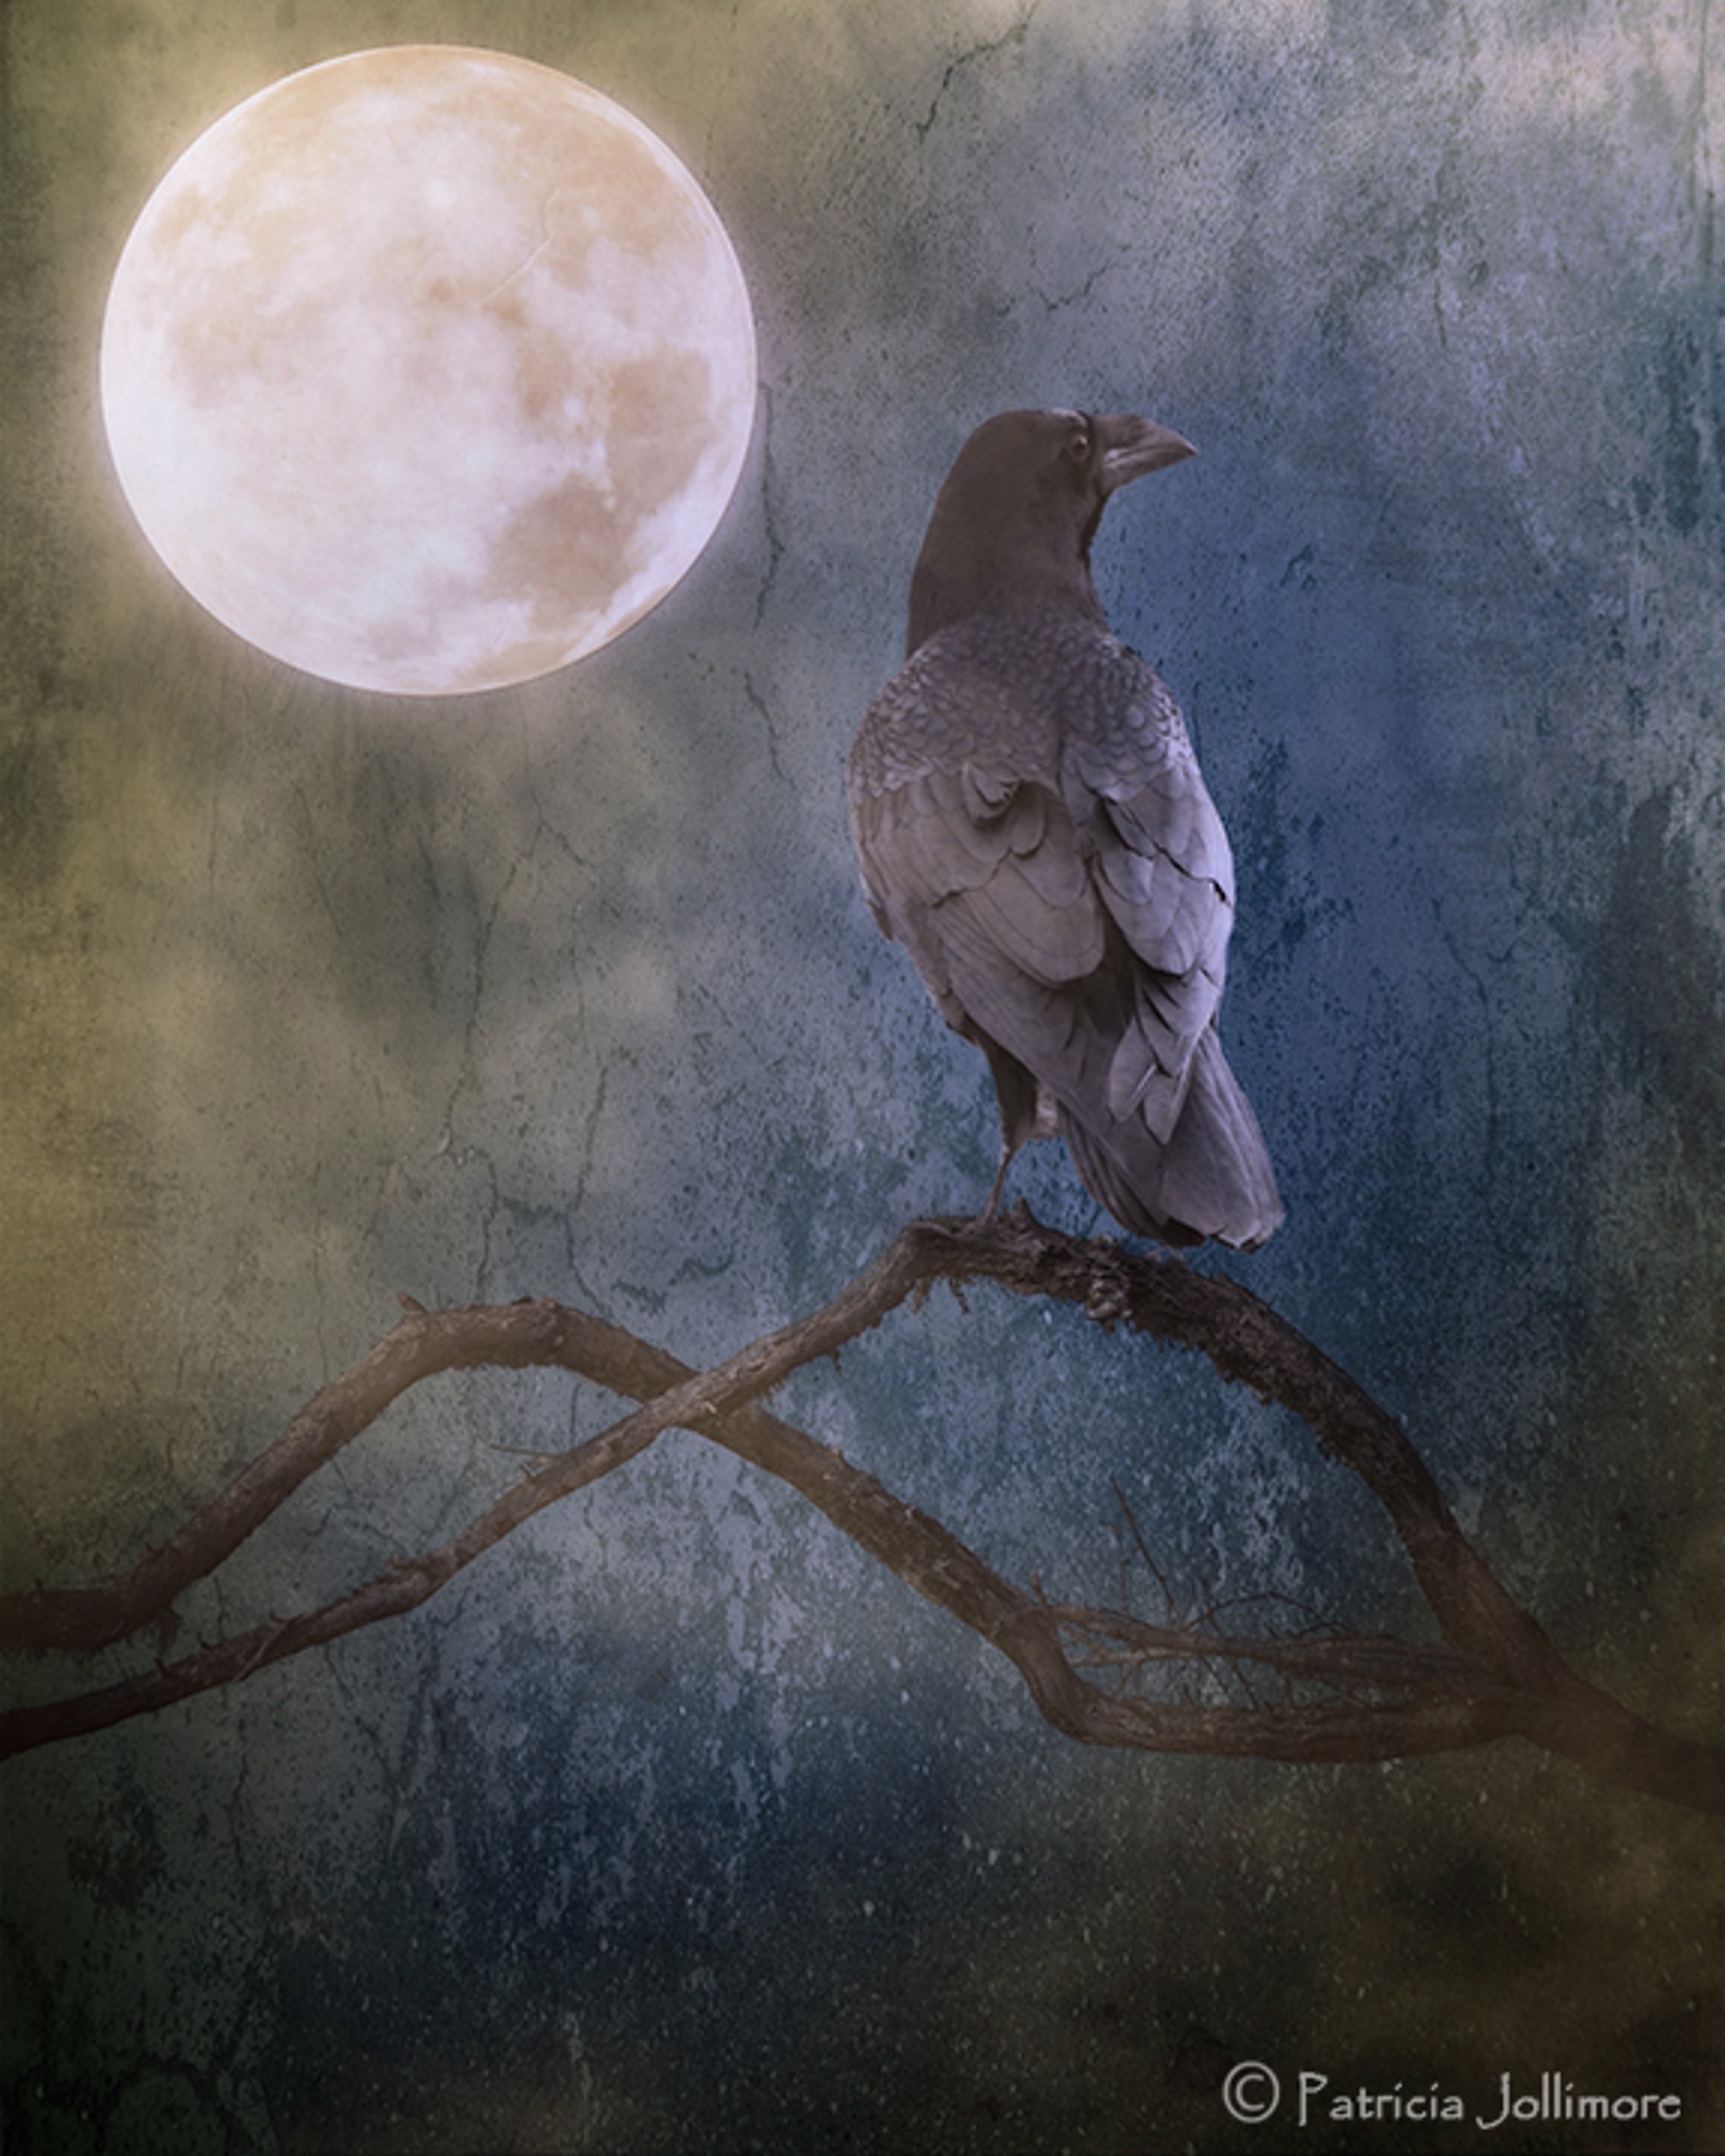 Basking in the Moonlight by Patricia Jollimore